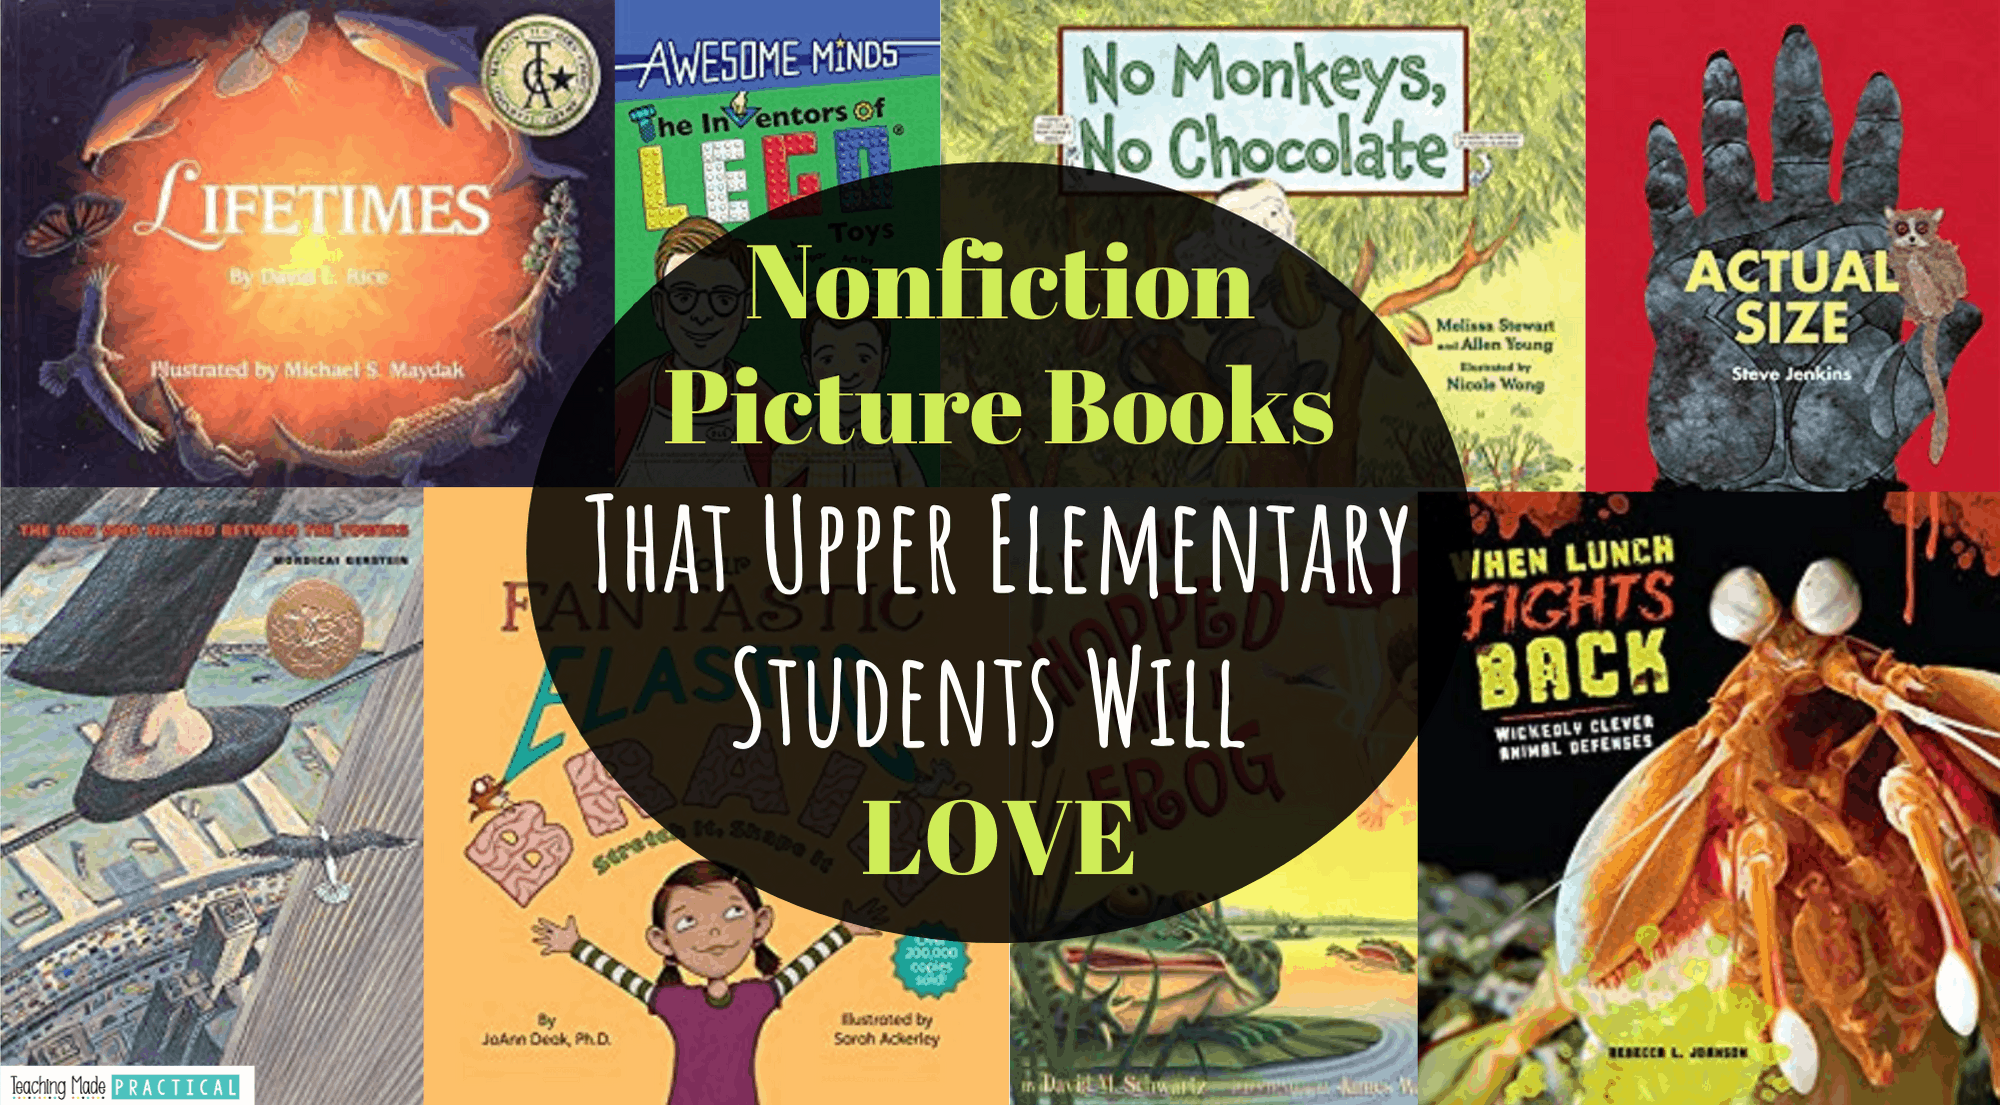 nonfiction picture books that 3rd, 4th, and 5th grade students will love